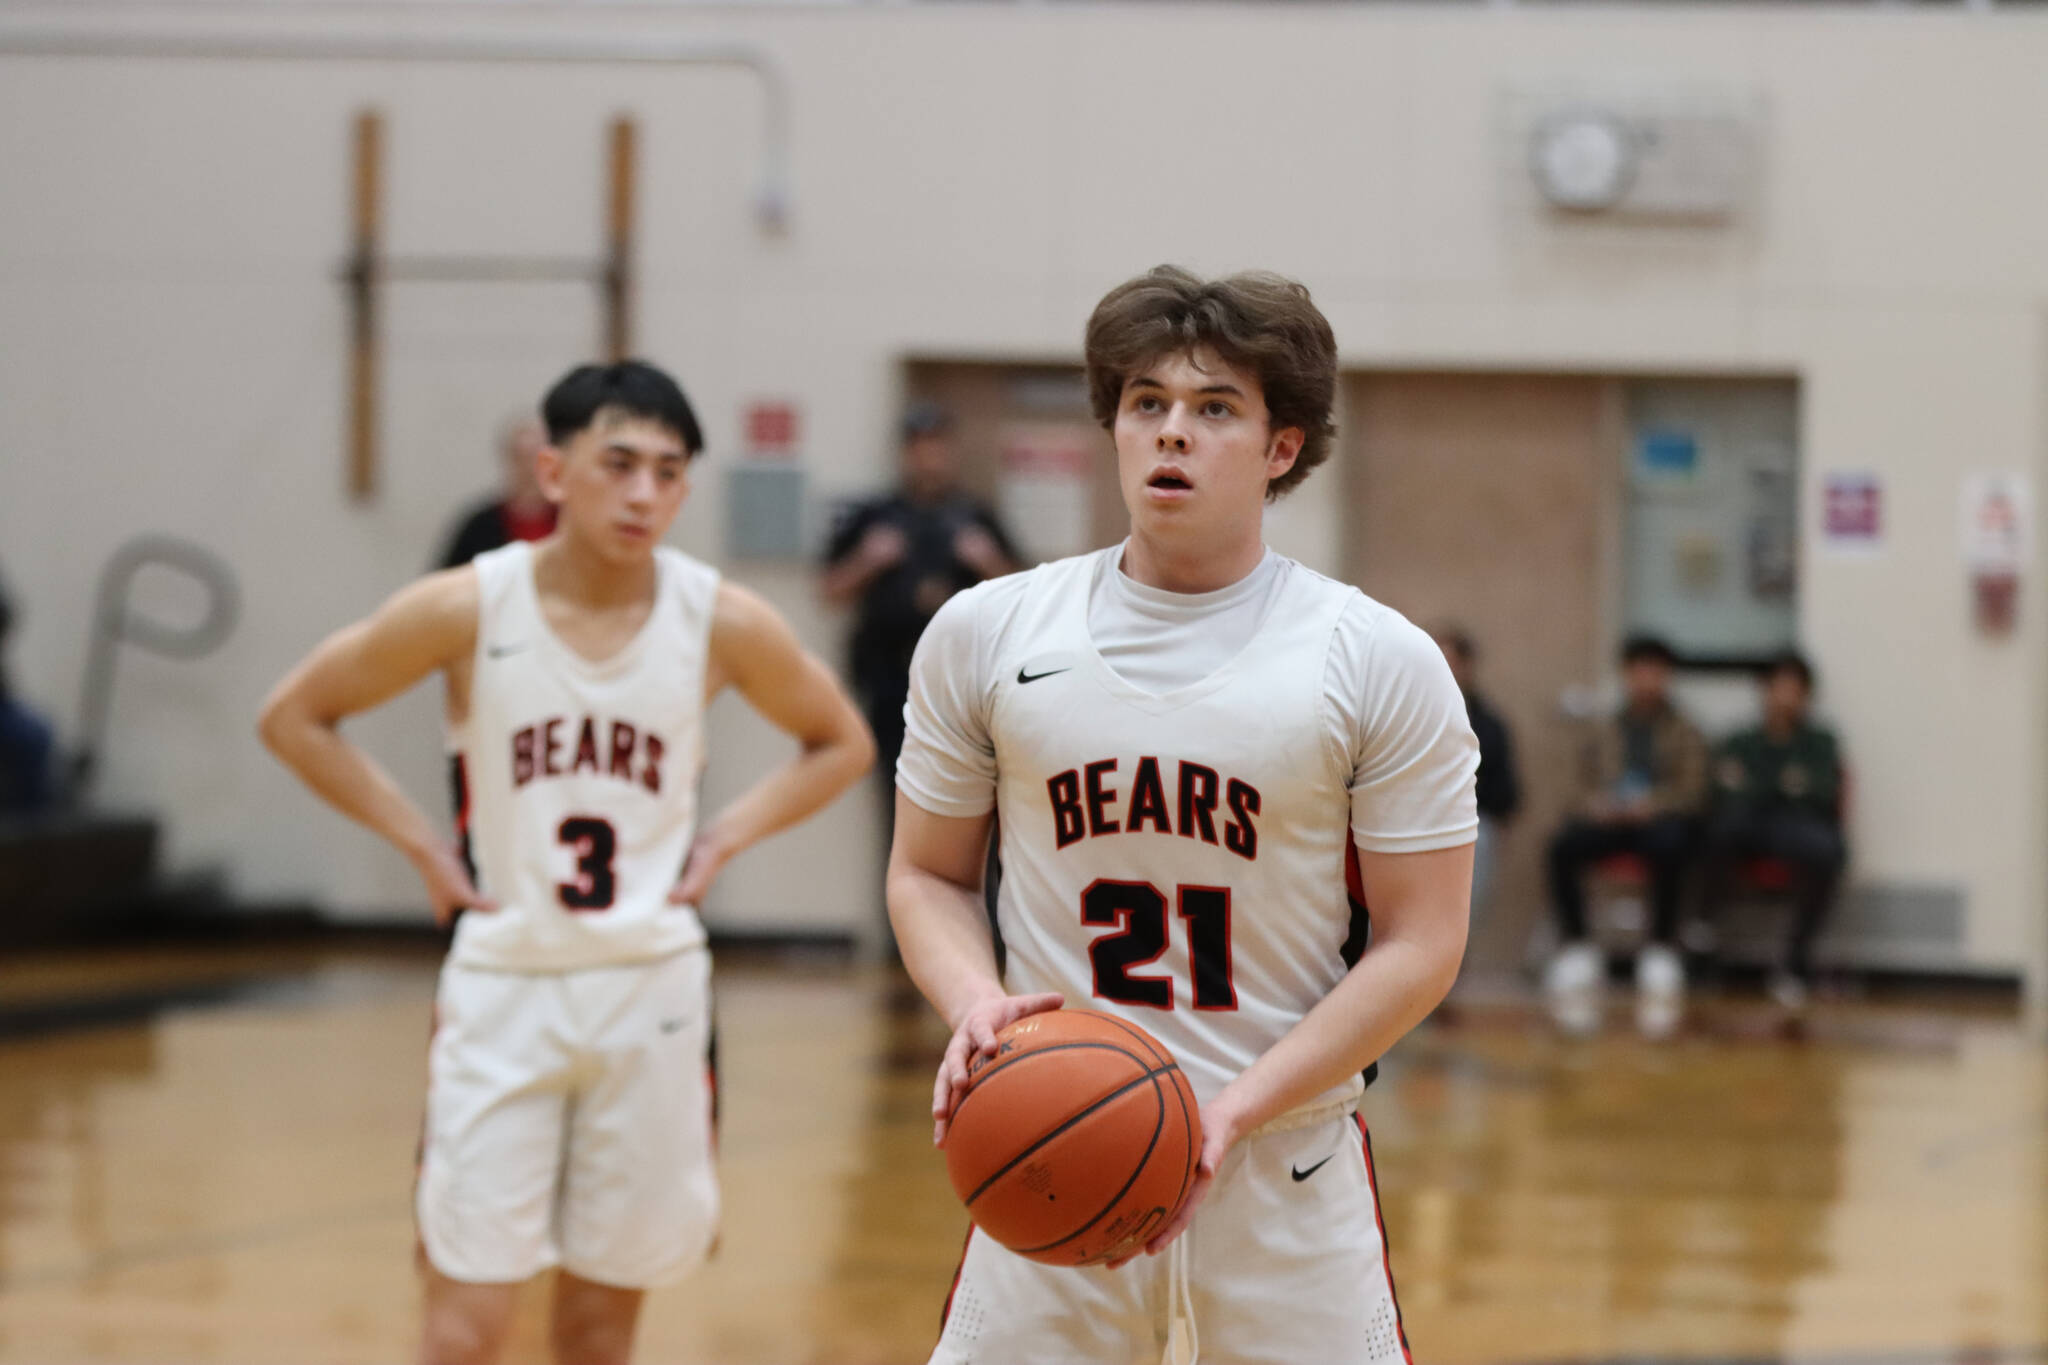 JDHS senior Caden Mesdag, seen taking a free throw shot against Ketchikan on Feb. 11, scored a total of 8-points in Friday’s game against Palmer High School. (Jonson Kuhn / Juneau Empire file)